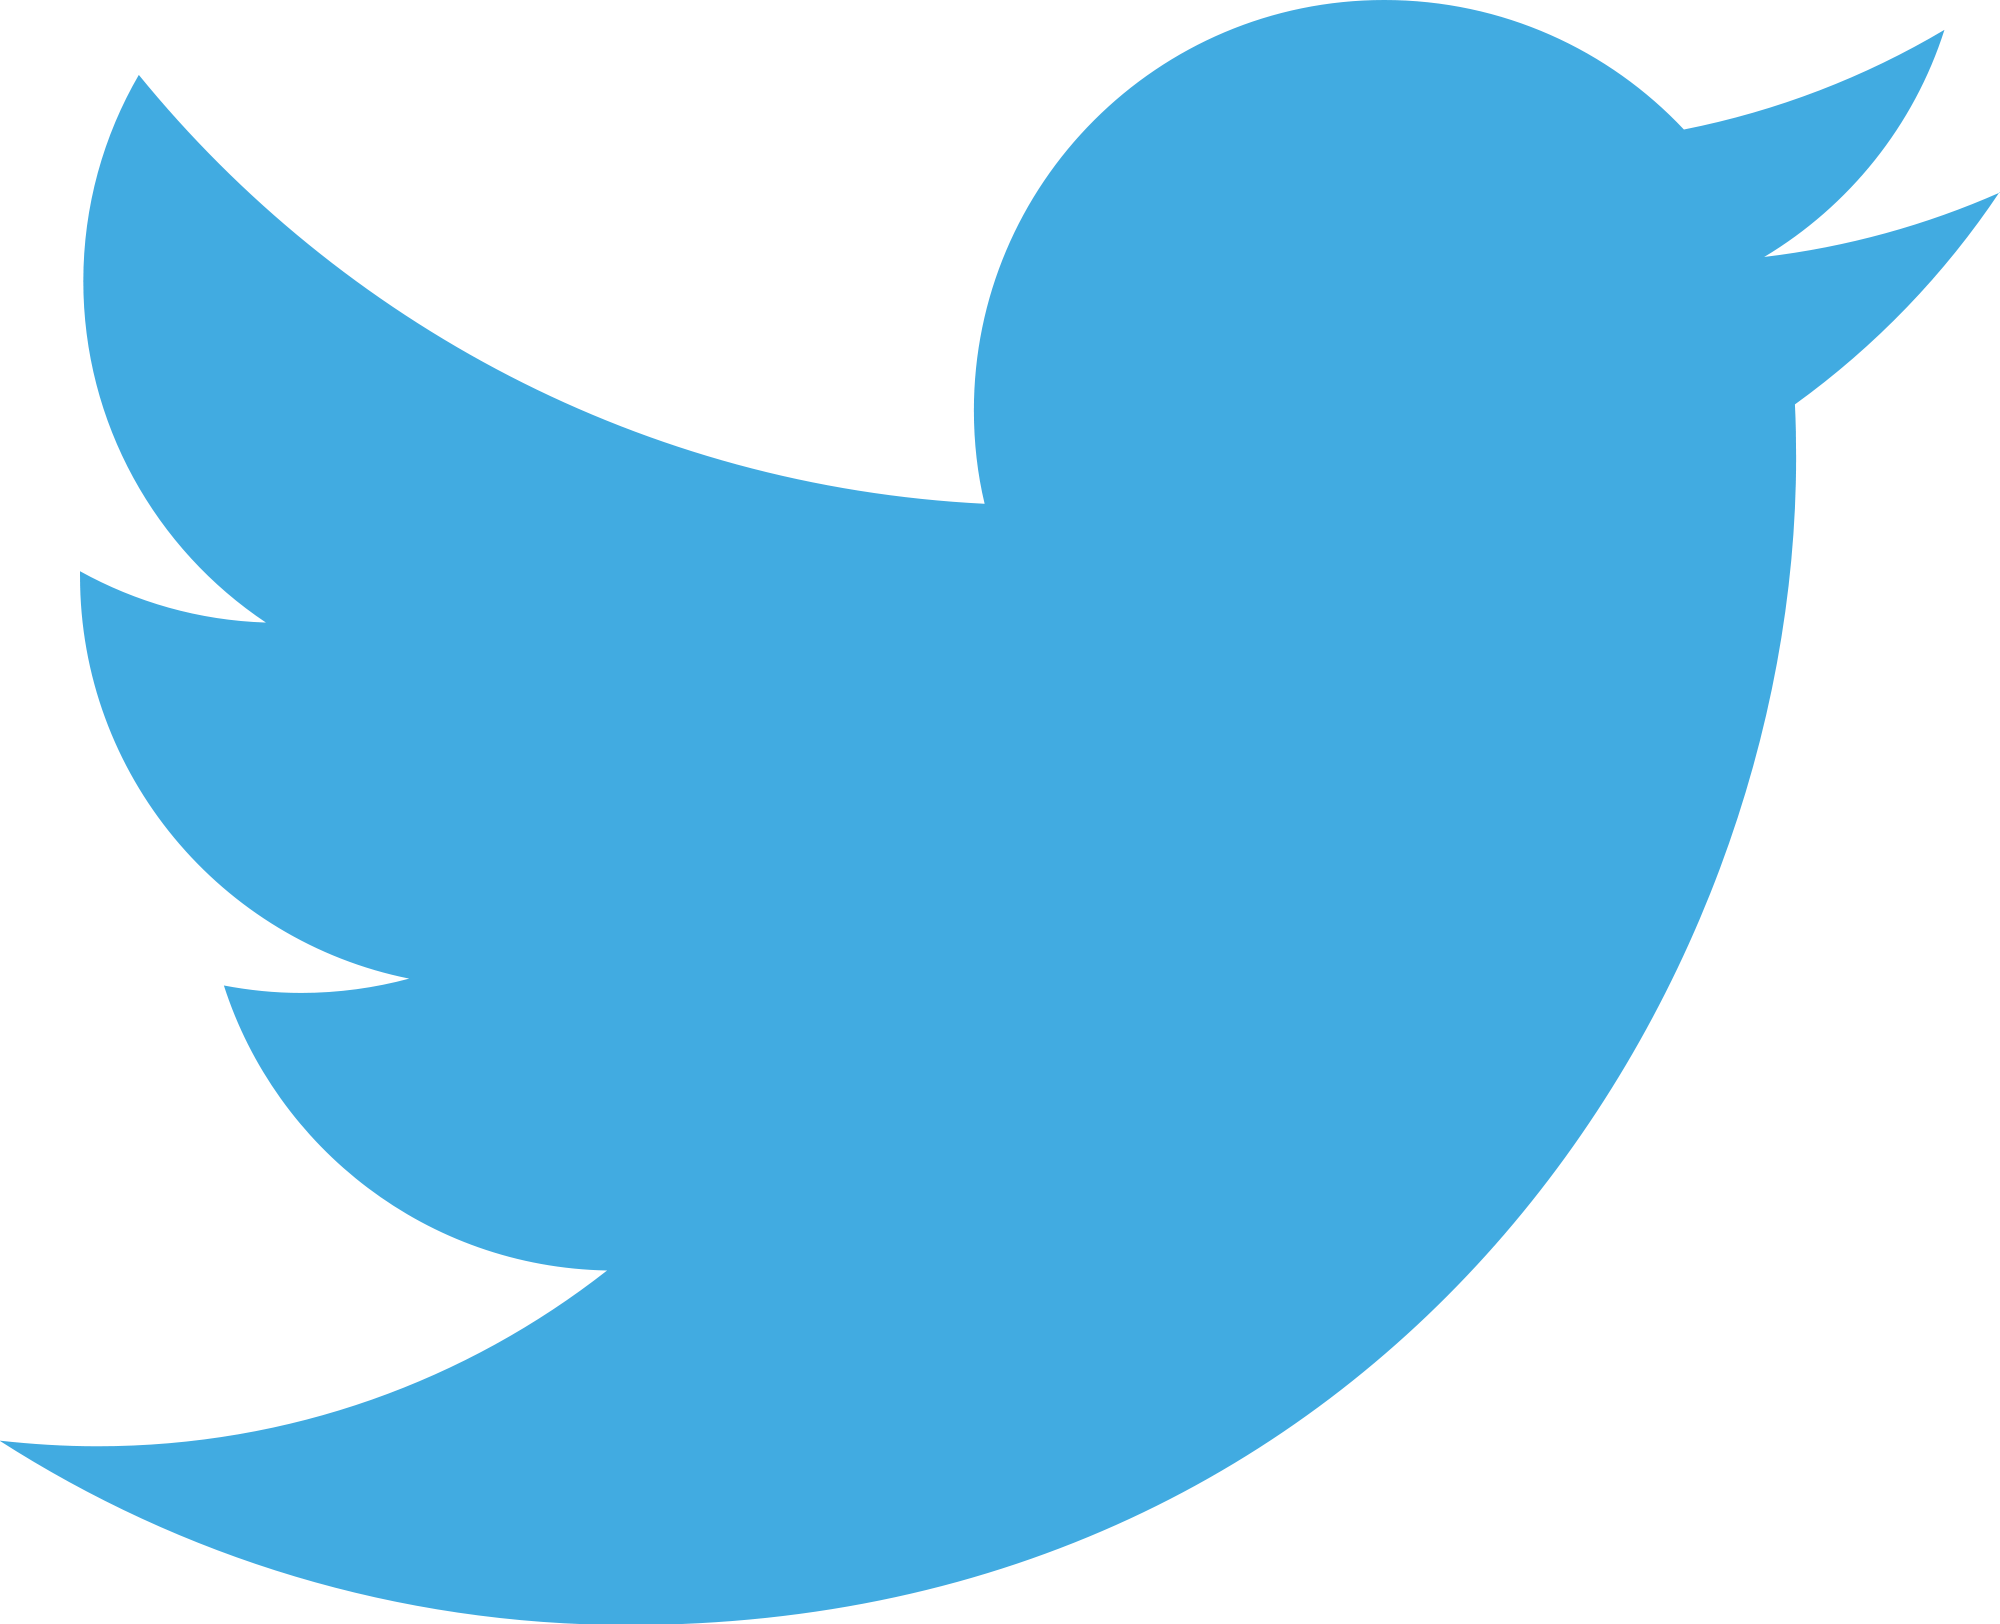 Twitter Bird Free Cliparts That You Can Download To You Computer And